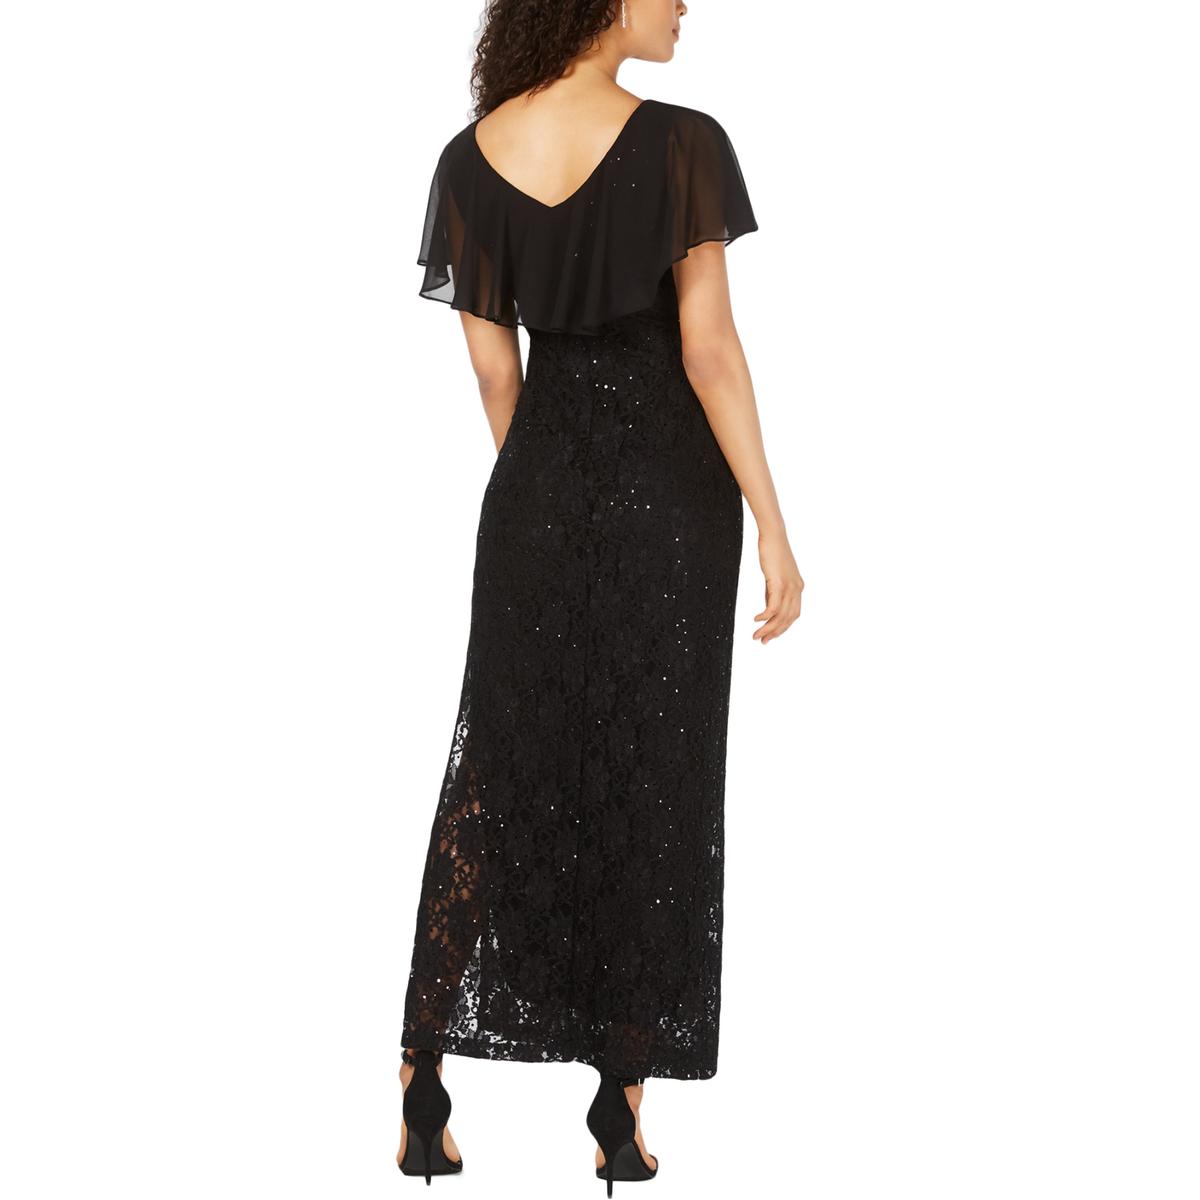 Connected Apparel Womens Lace Sequined Formal Evening Dress Gown BHFO ...